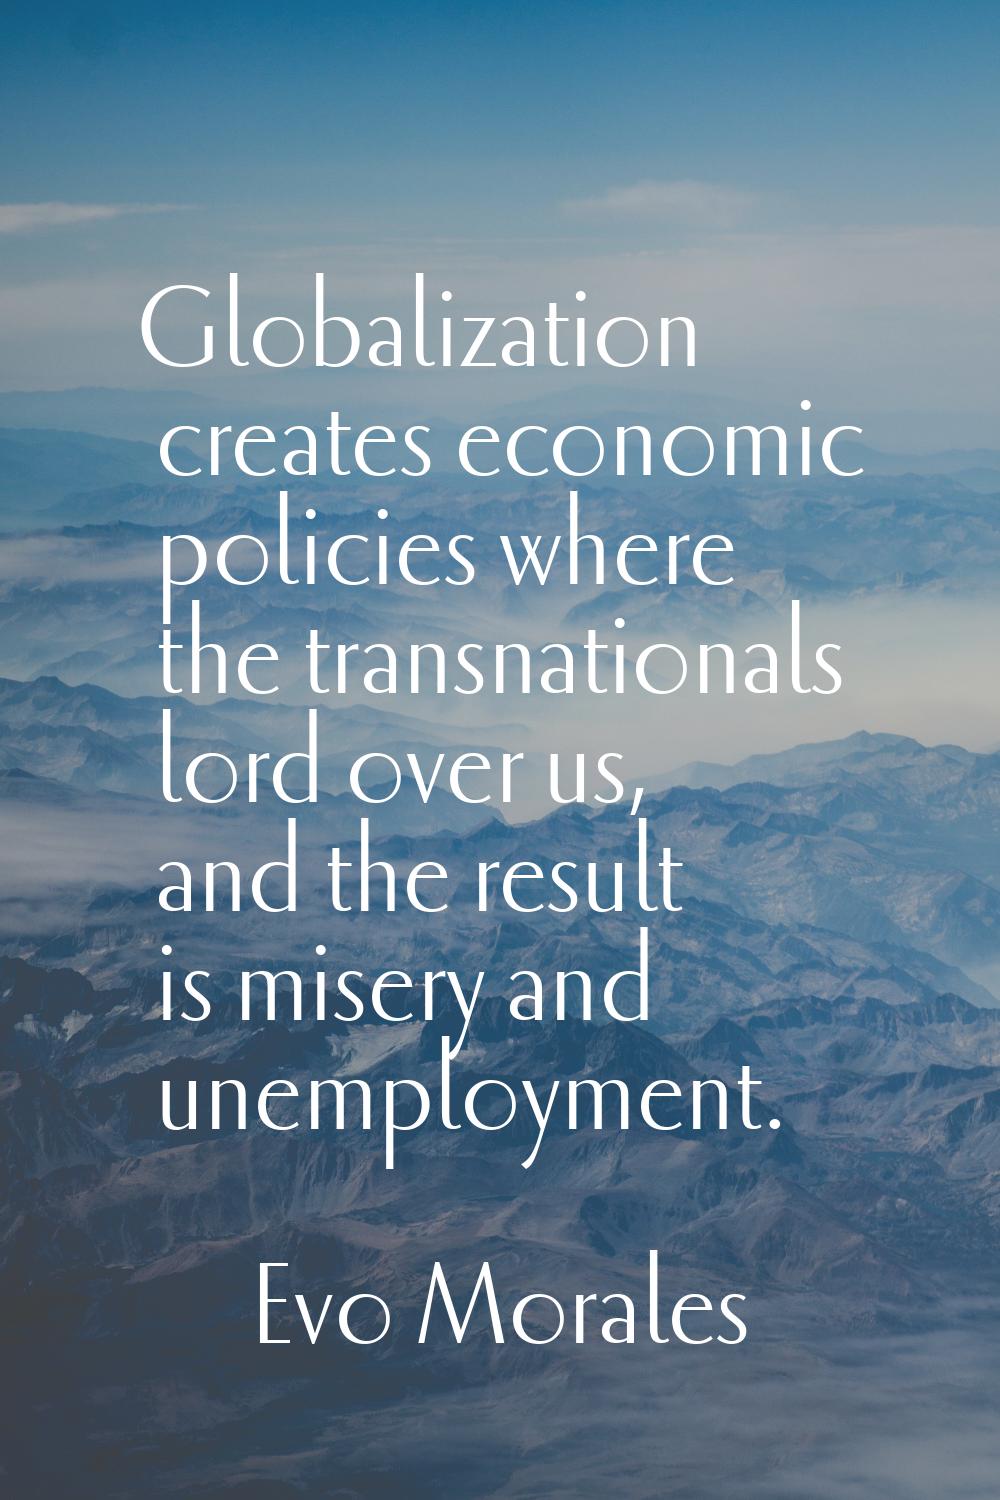 Globalization creates economic policies where the transnationals lord over us, and the result is mi